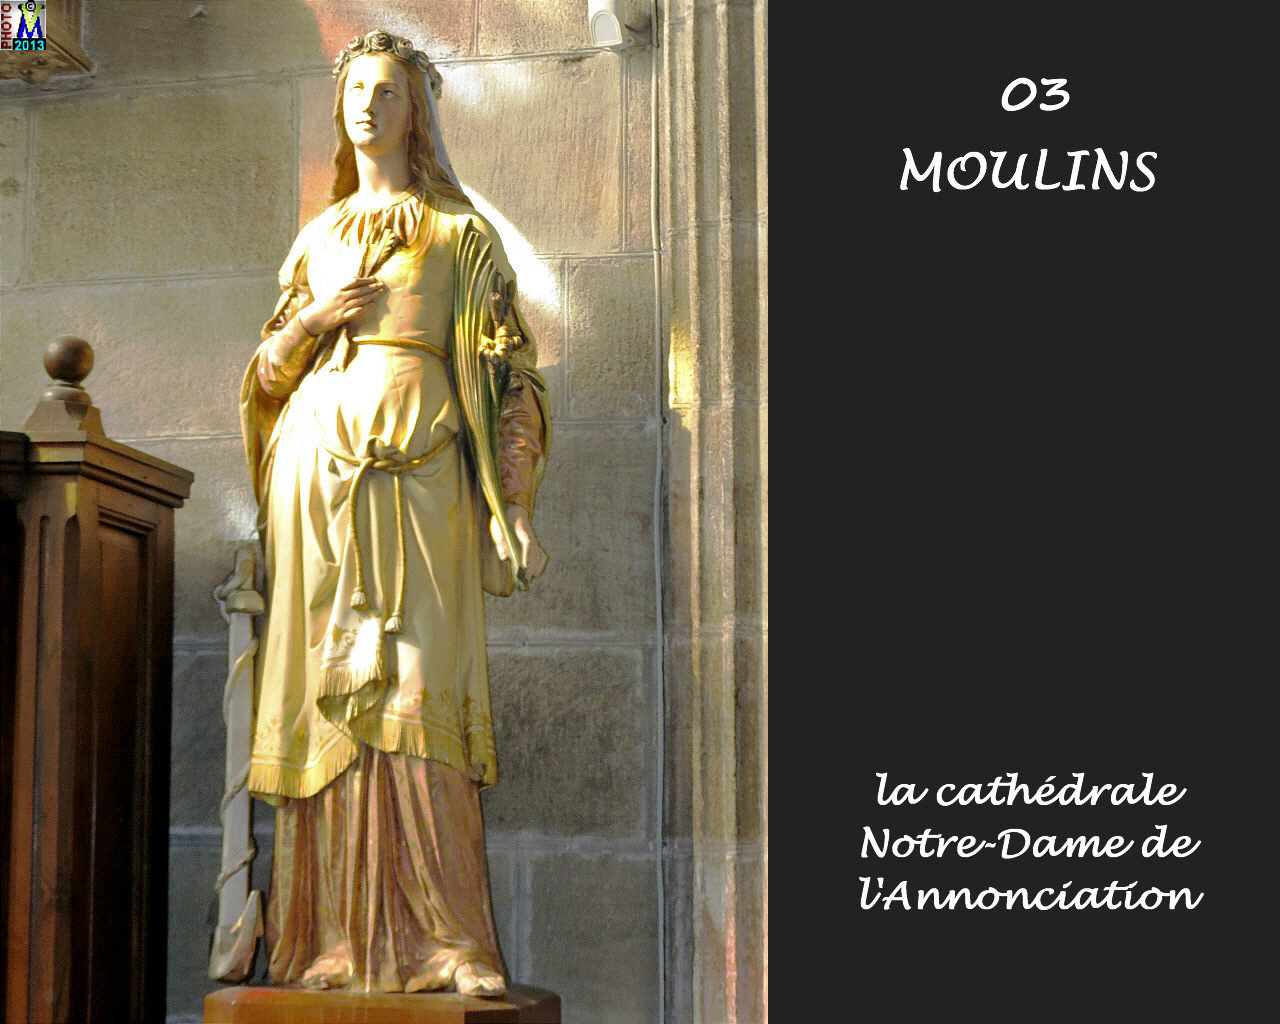 03MOULINS_cathedrale_244.jpg